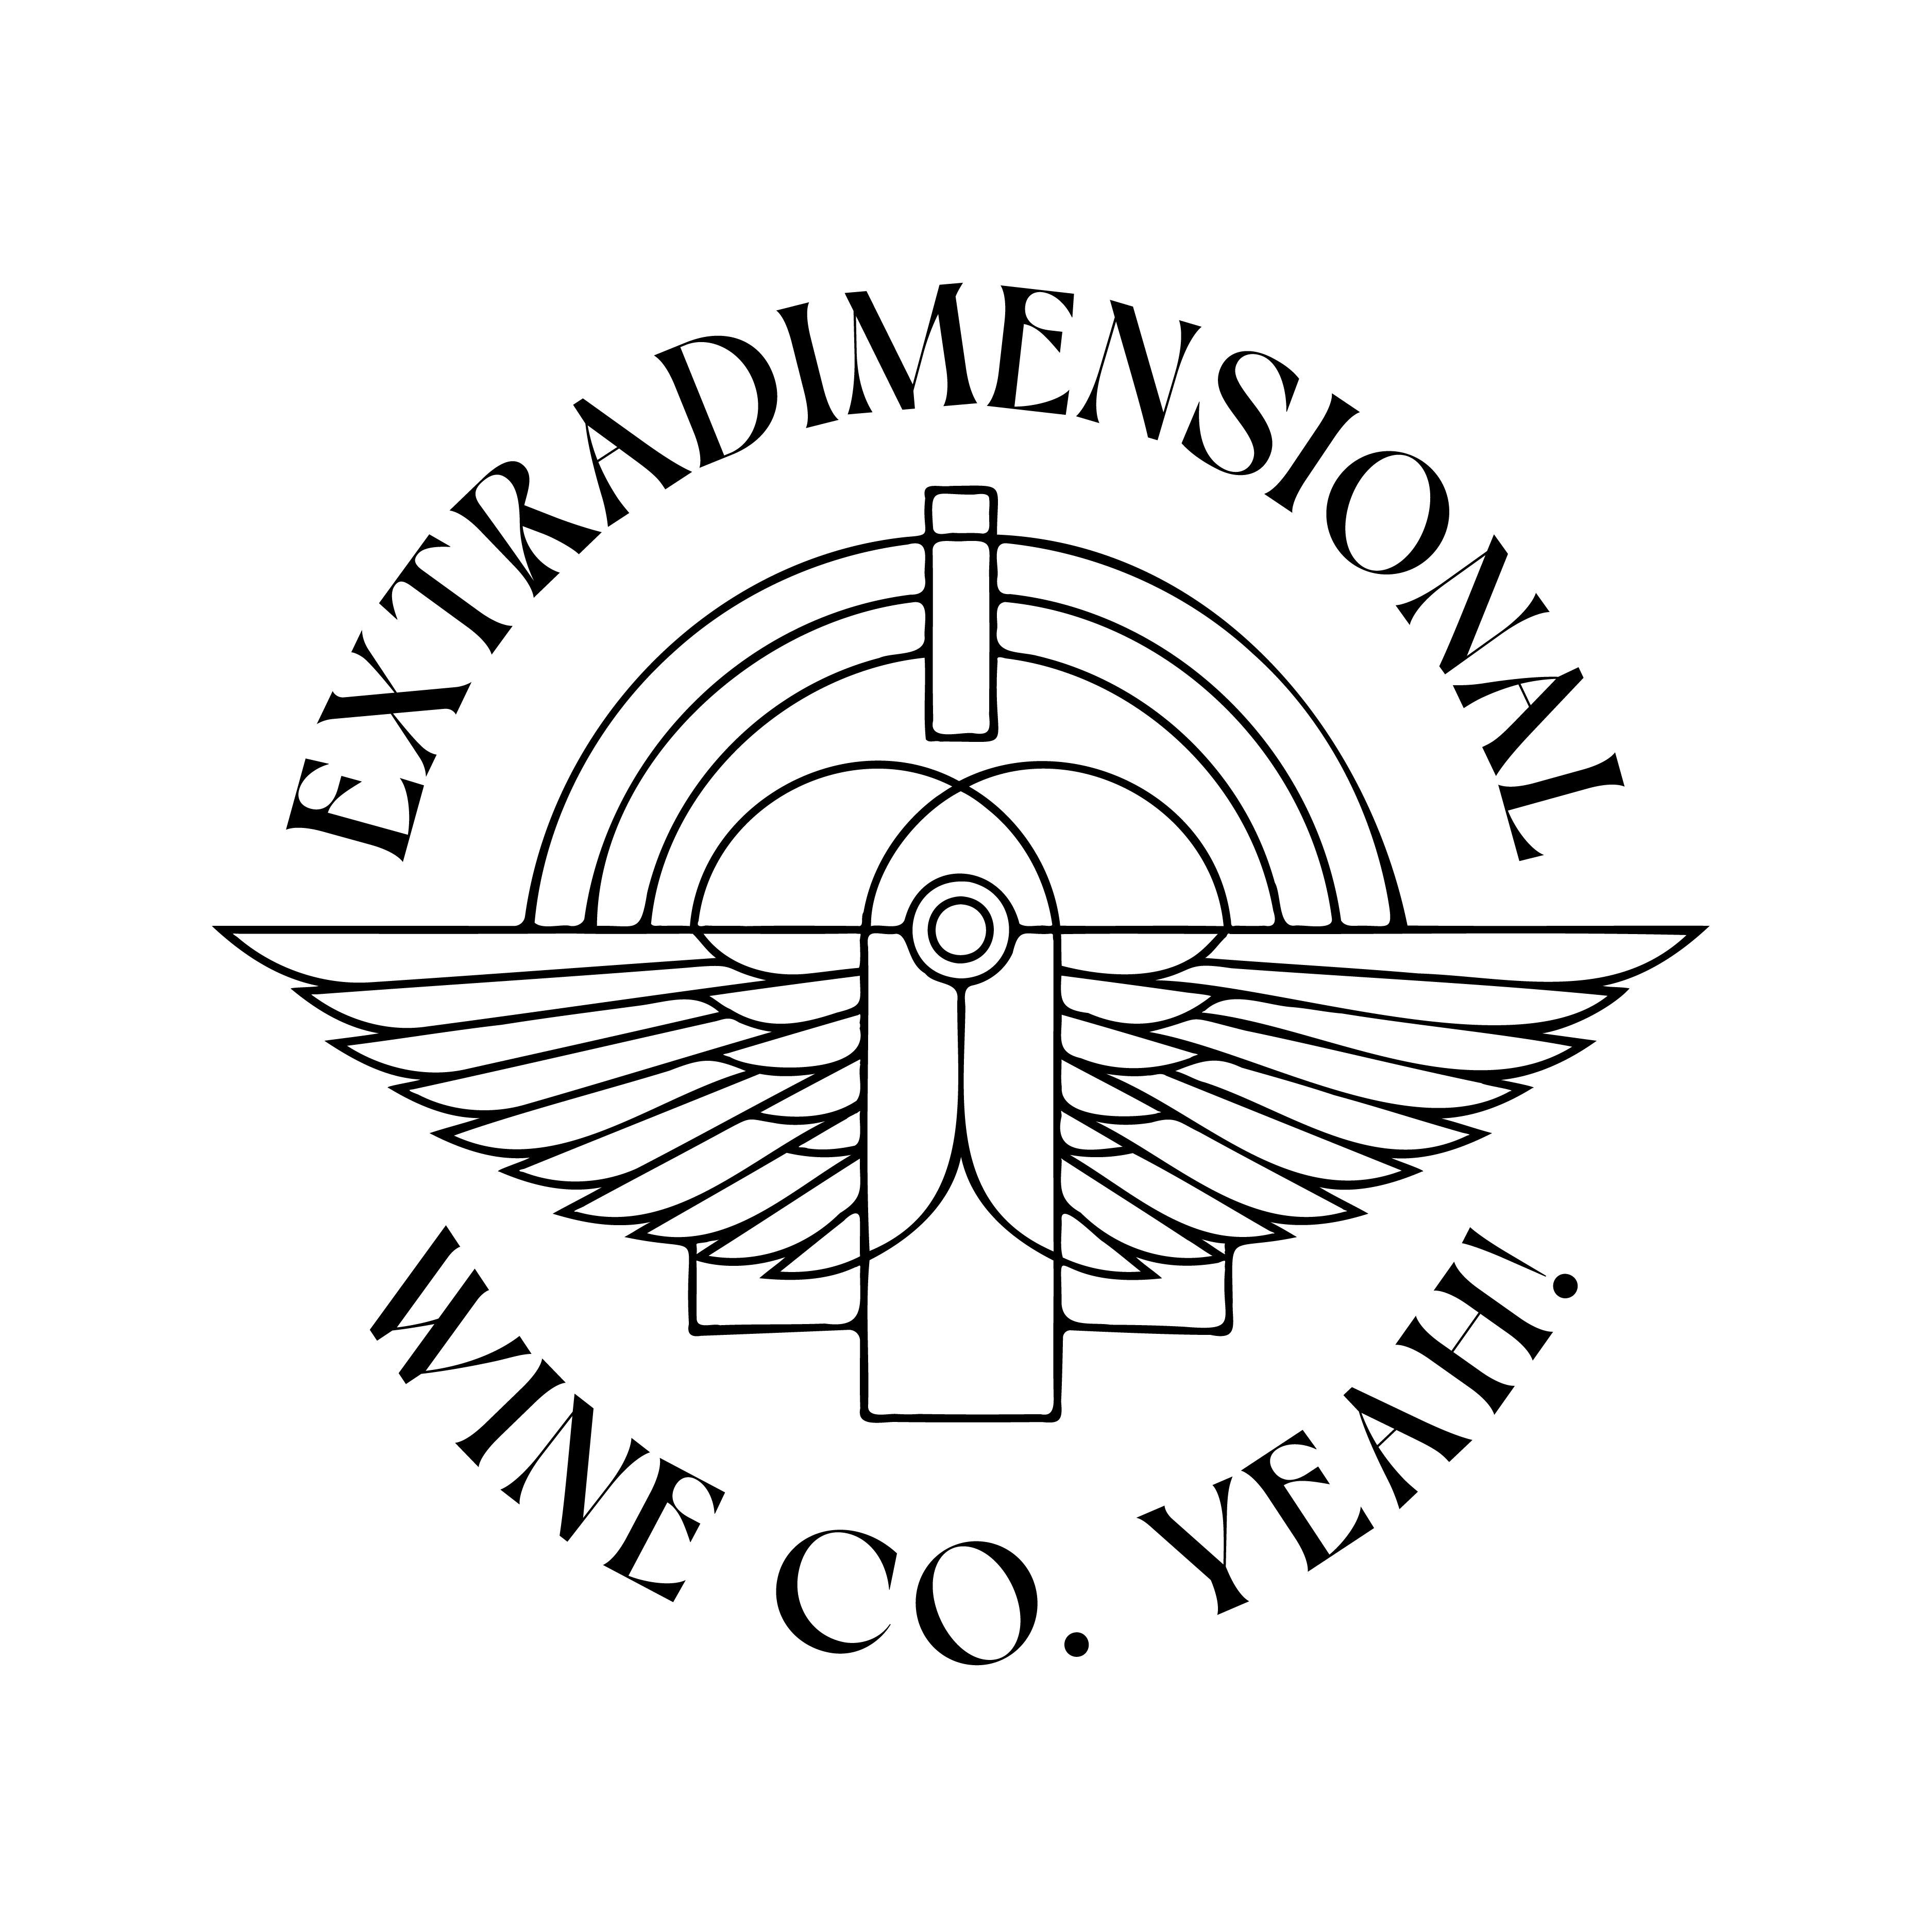 Extradimensional Wine Co. Yeah! logo design by logo designer Steely Works for your inspiration and for the worlds largest logo competition